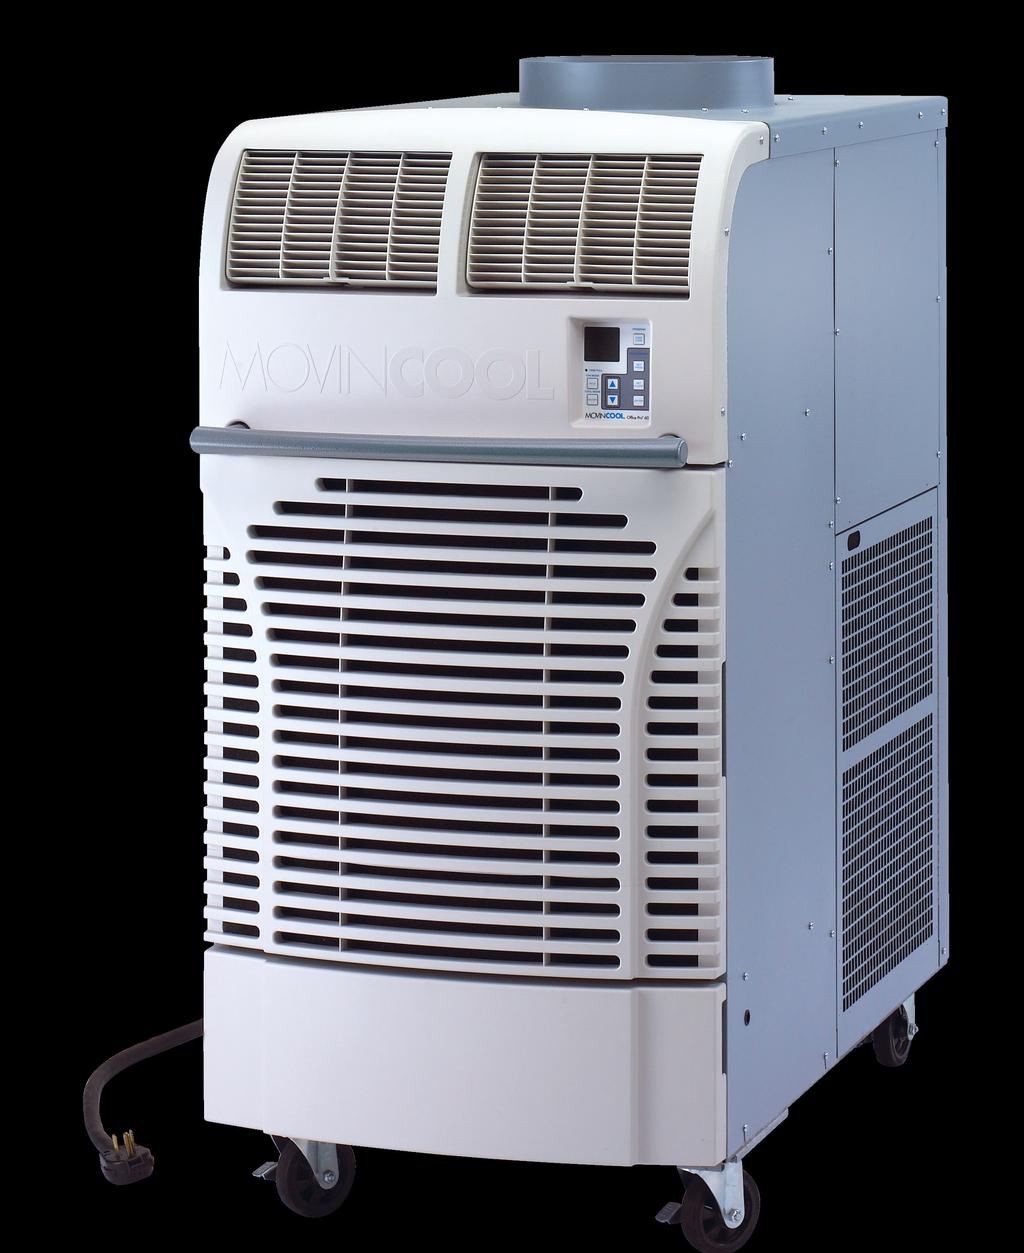 Office Pro 63 Providing up to 60,000 Btu/h of computer cooling capacity (more than twice the cooling power of the Office Pro 24), the Office Pro 63 portable air conditioner is specifically designed